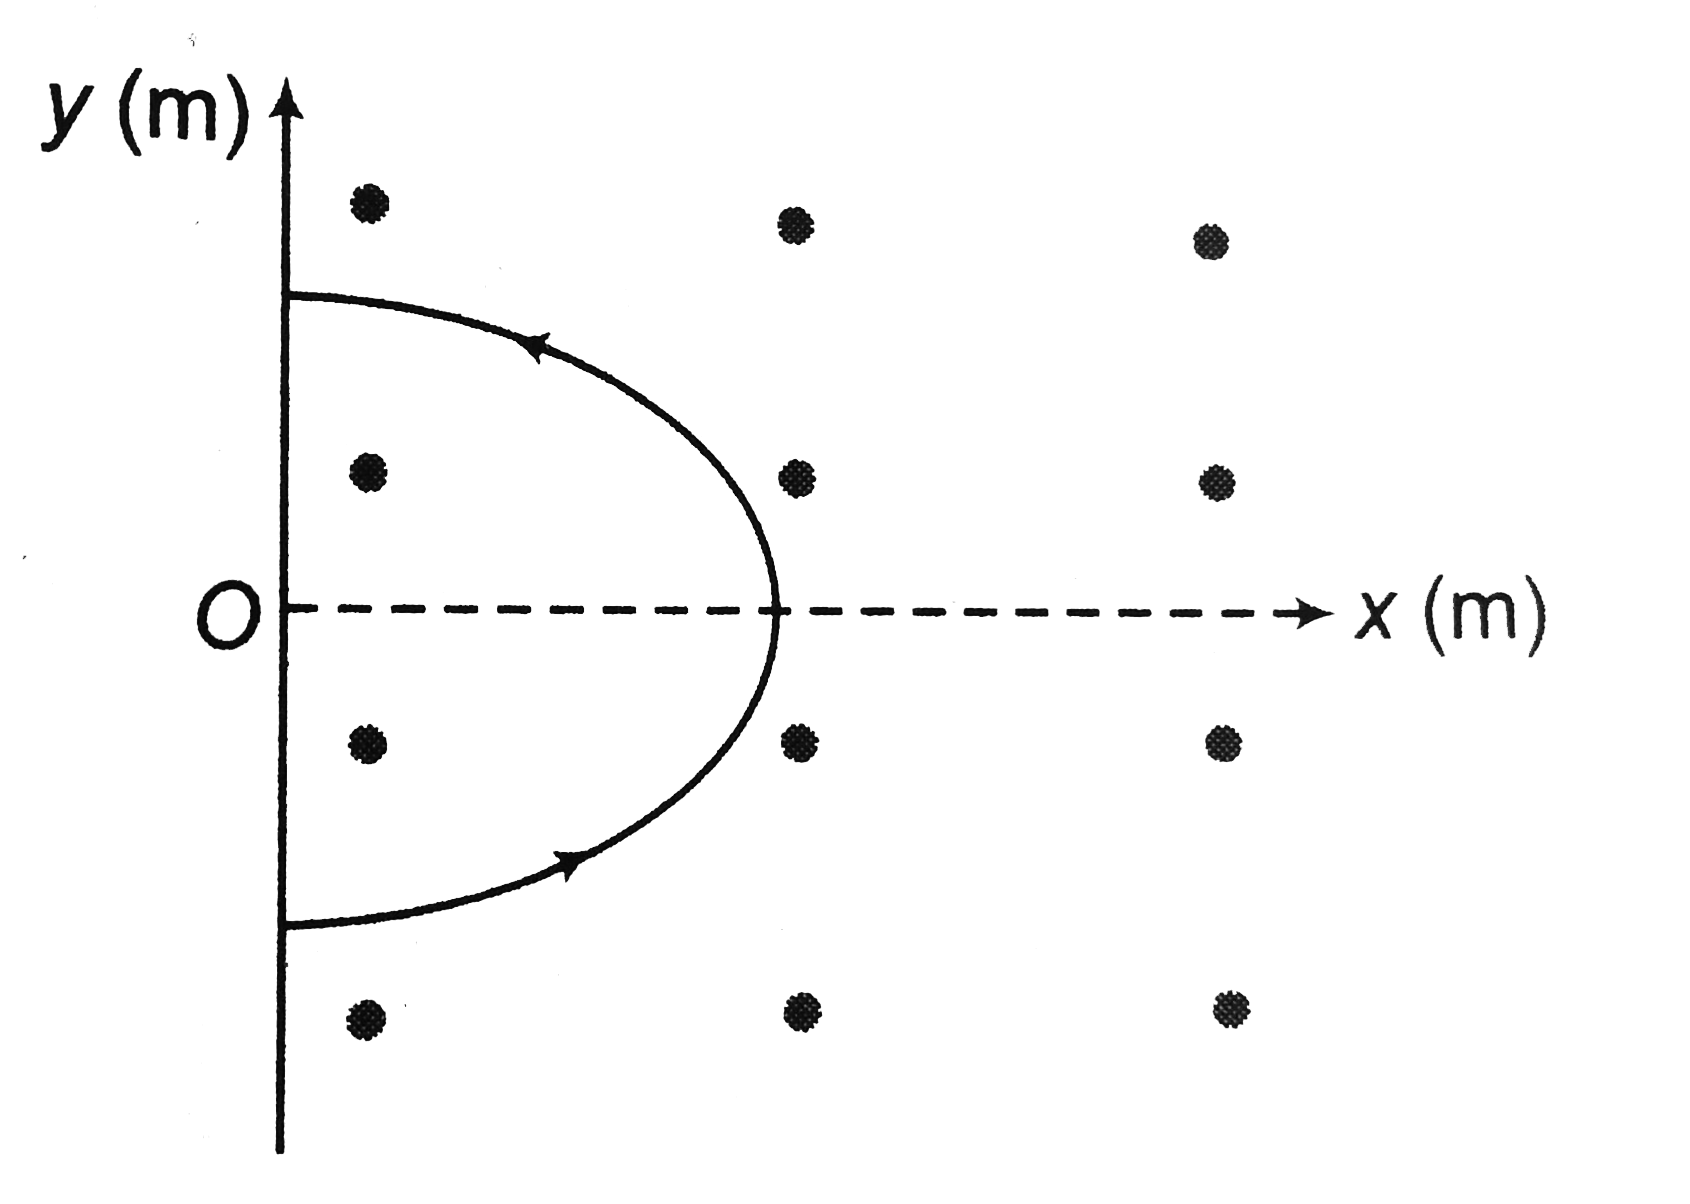 A wire carrying a current of 3A is bent in the form of a parabola y^2=4-x as shown in figure, where x and y are in meter. The wire is placed in a uniform magnetic field B=5hatk tesla. The force acting on the wire is